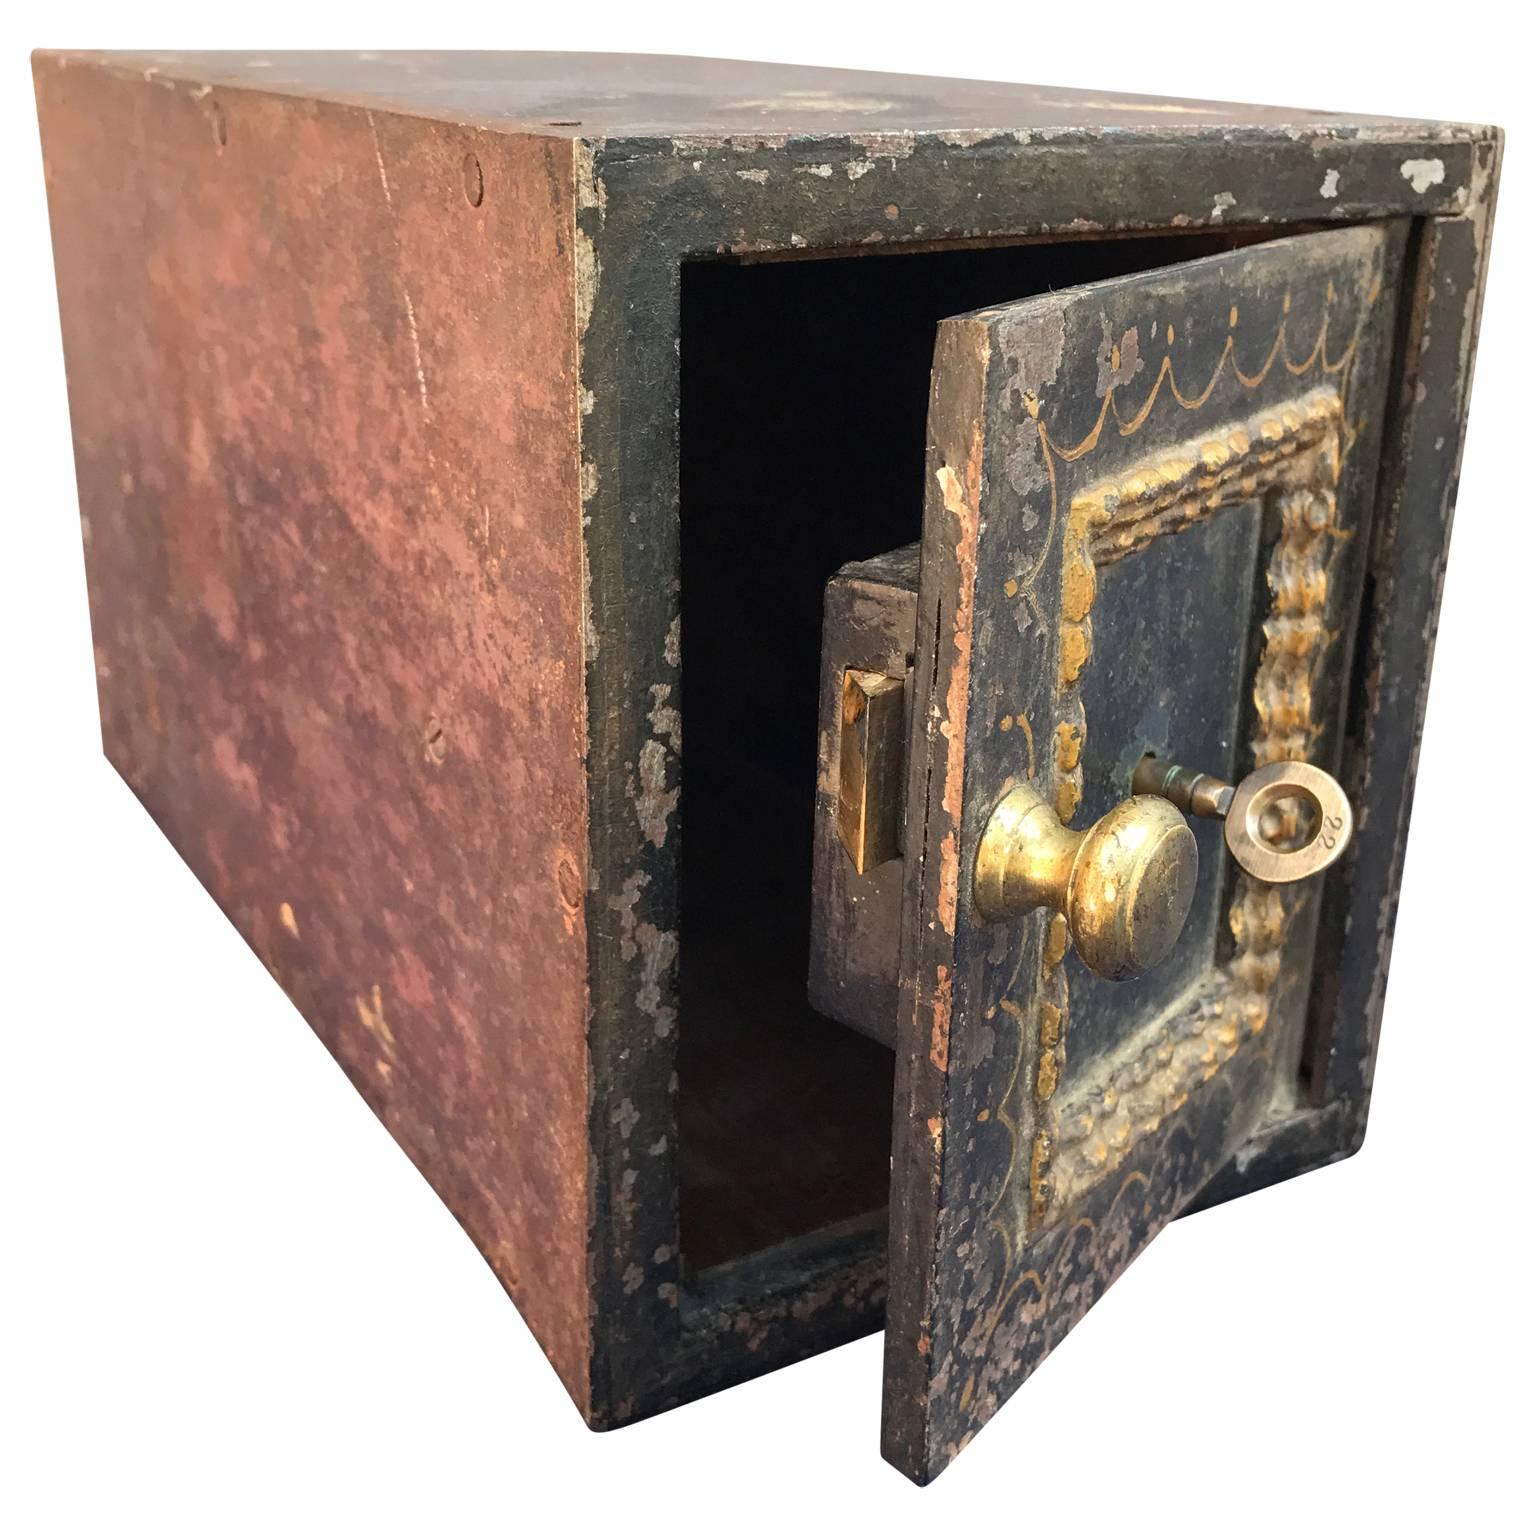 Small 19th century antique steel safe with original key and patina, possibly from an old hotel or club.